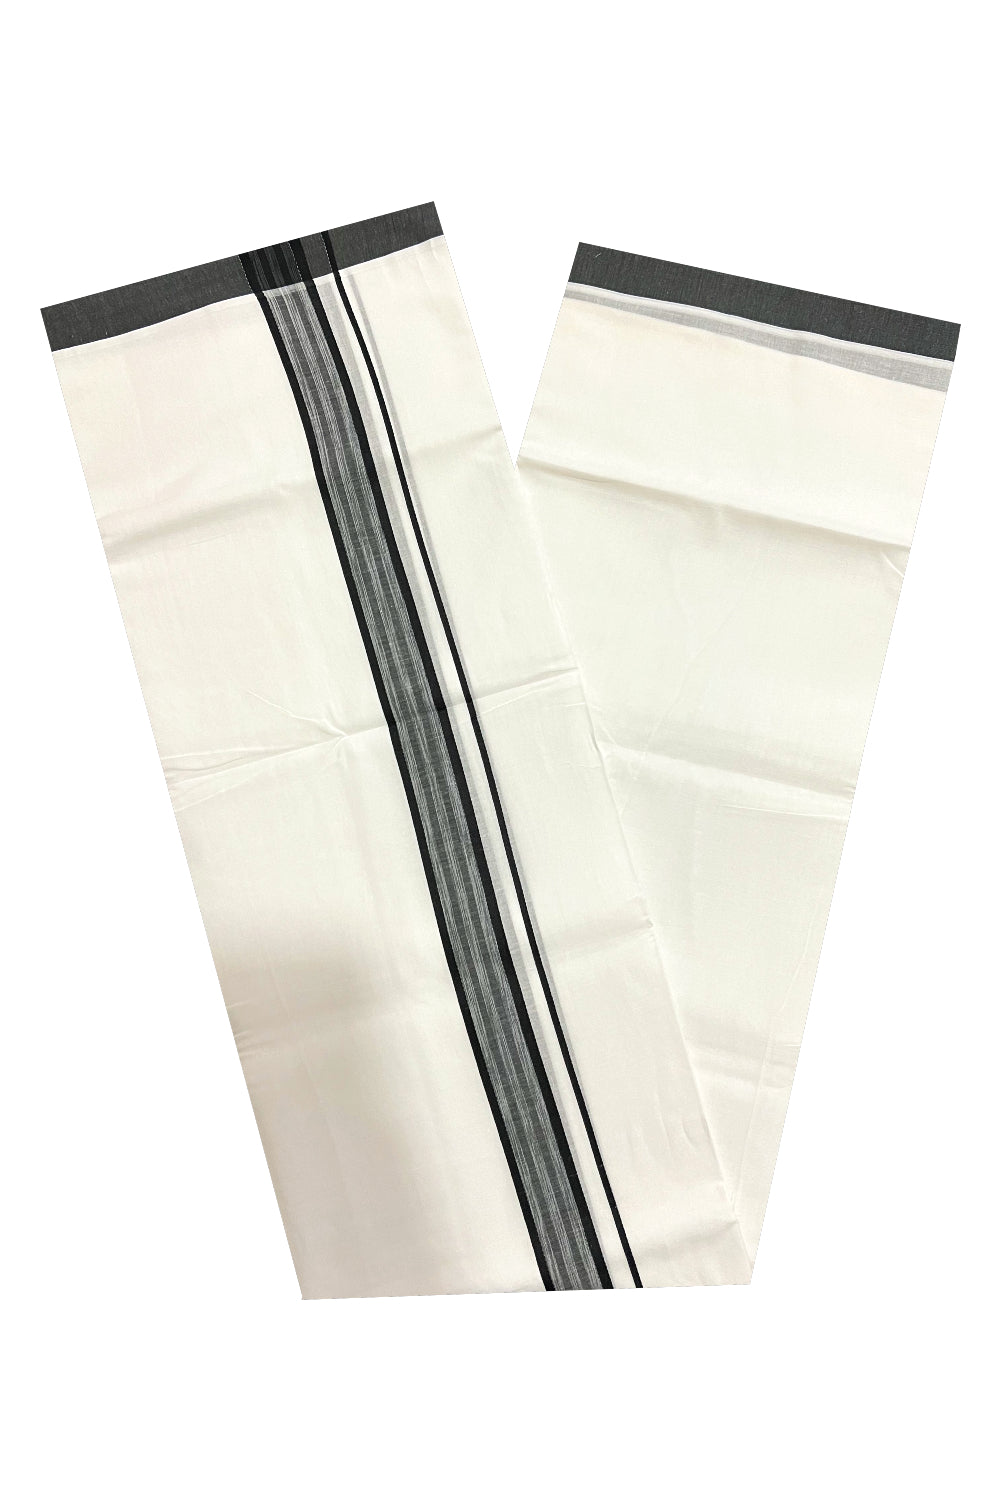 Pure White Cotton Double Mundu with Black Border (South Indian Dhoti)